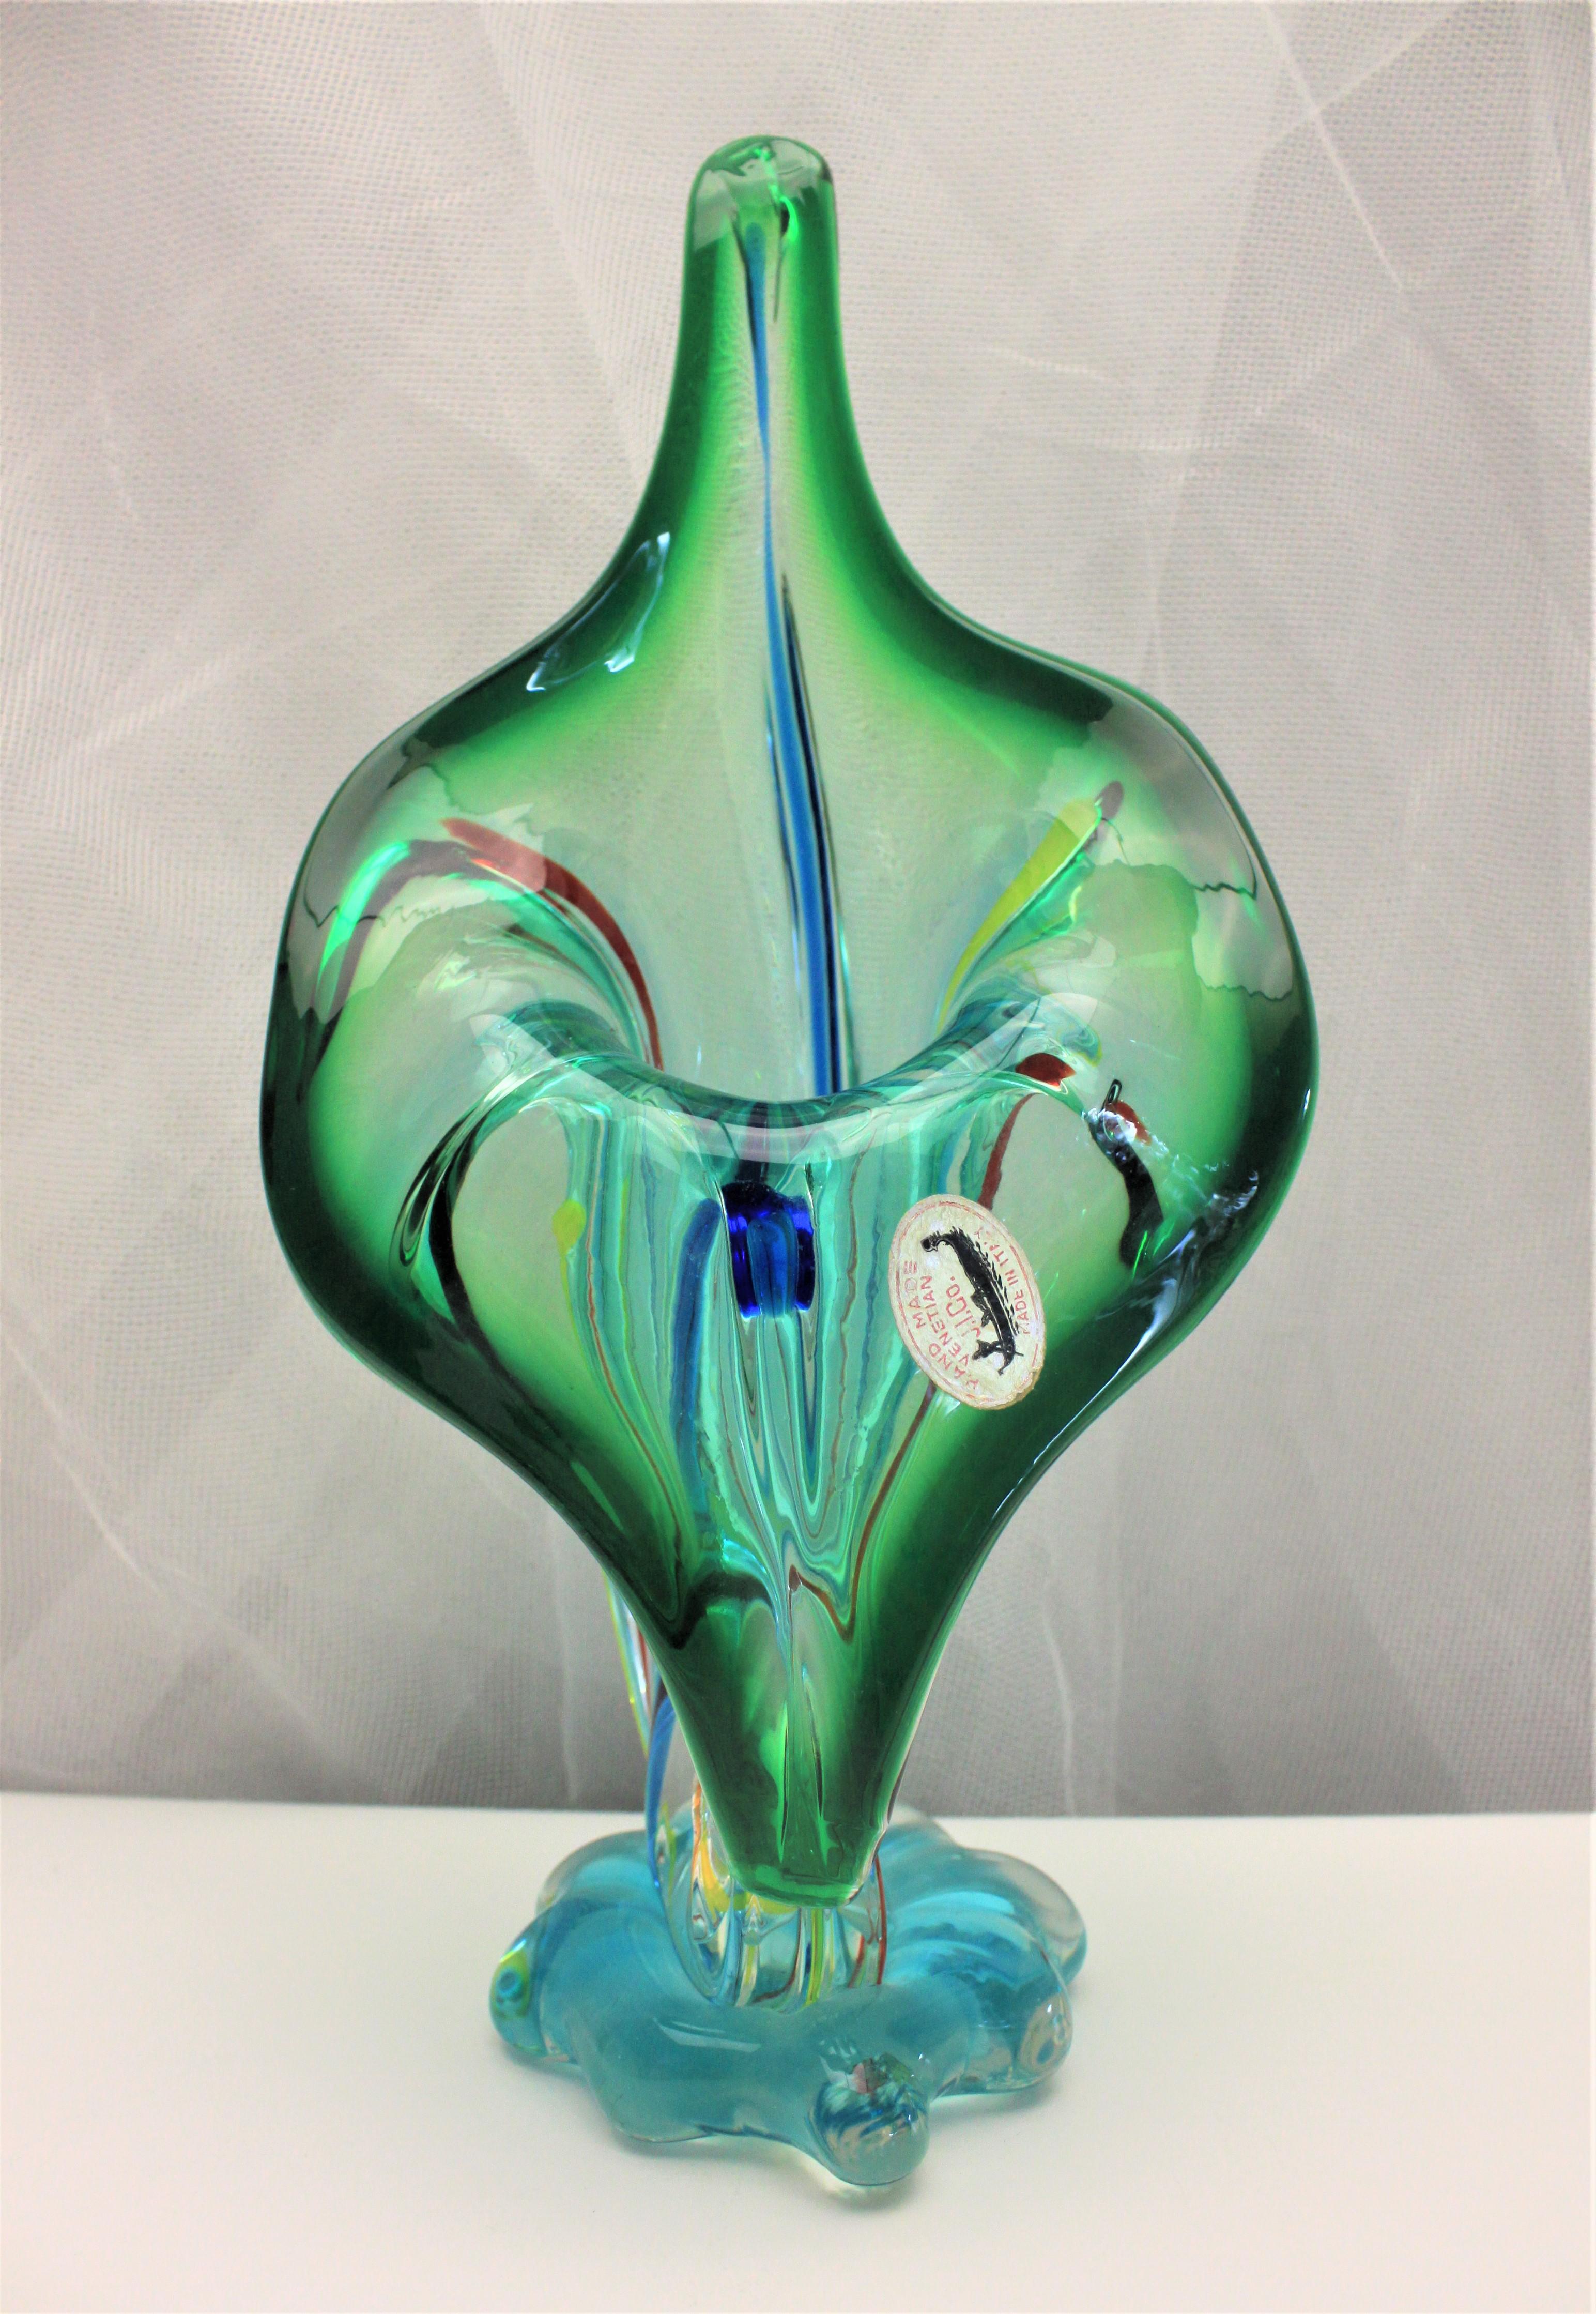 This large jack in the pulpit style art glass Murano vase was made during the 1960s in the Mid-Century Modern style. The vase is done in clear thick glass with a heavy green accent around the opening and with blue, red, and yellow stripes running